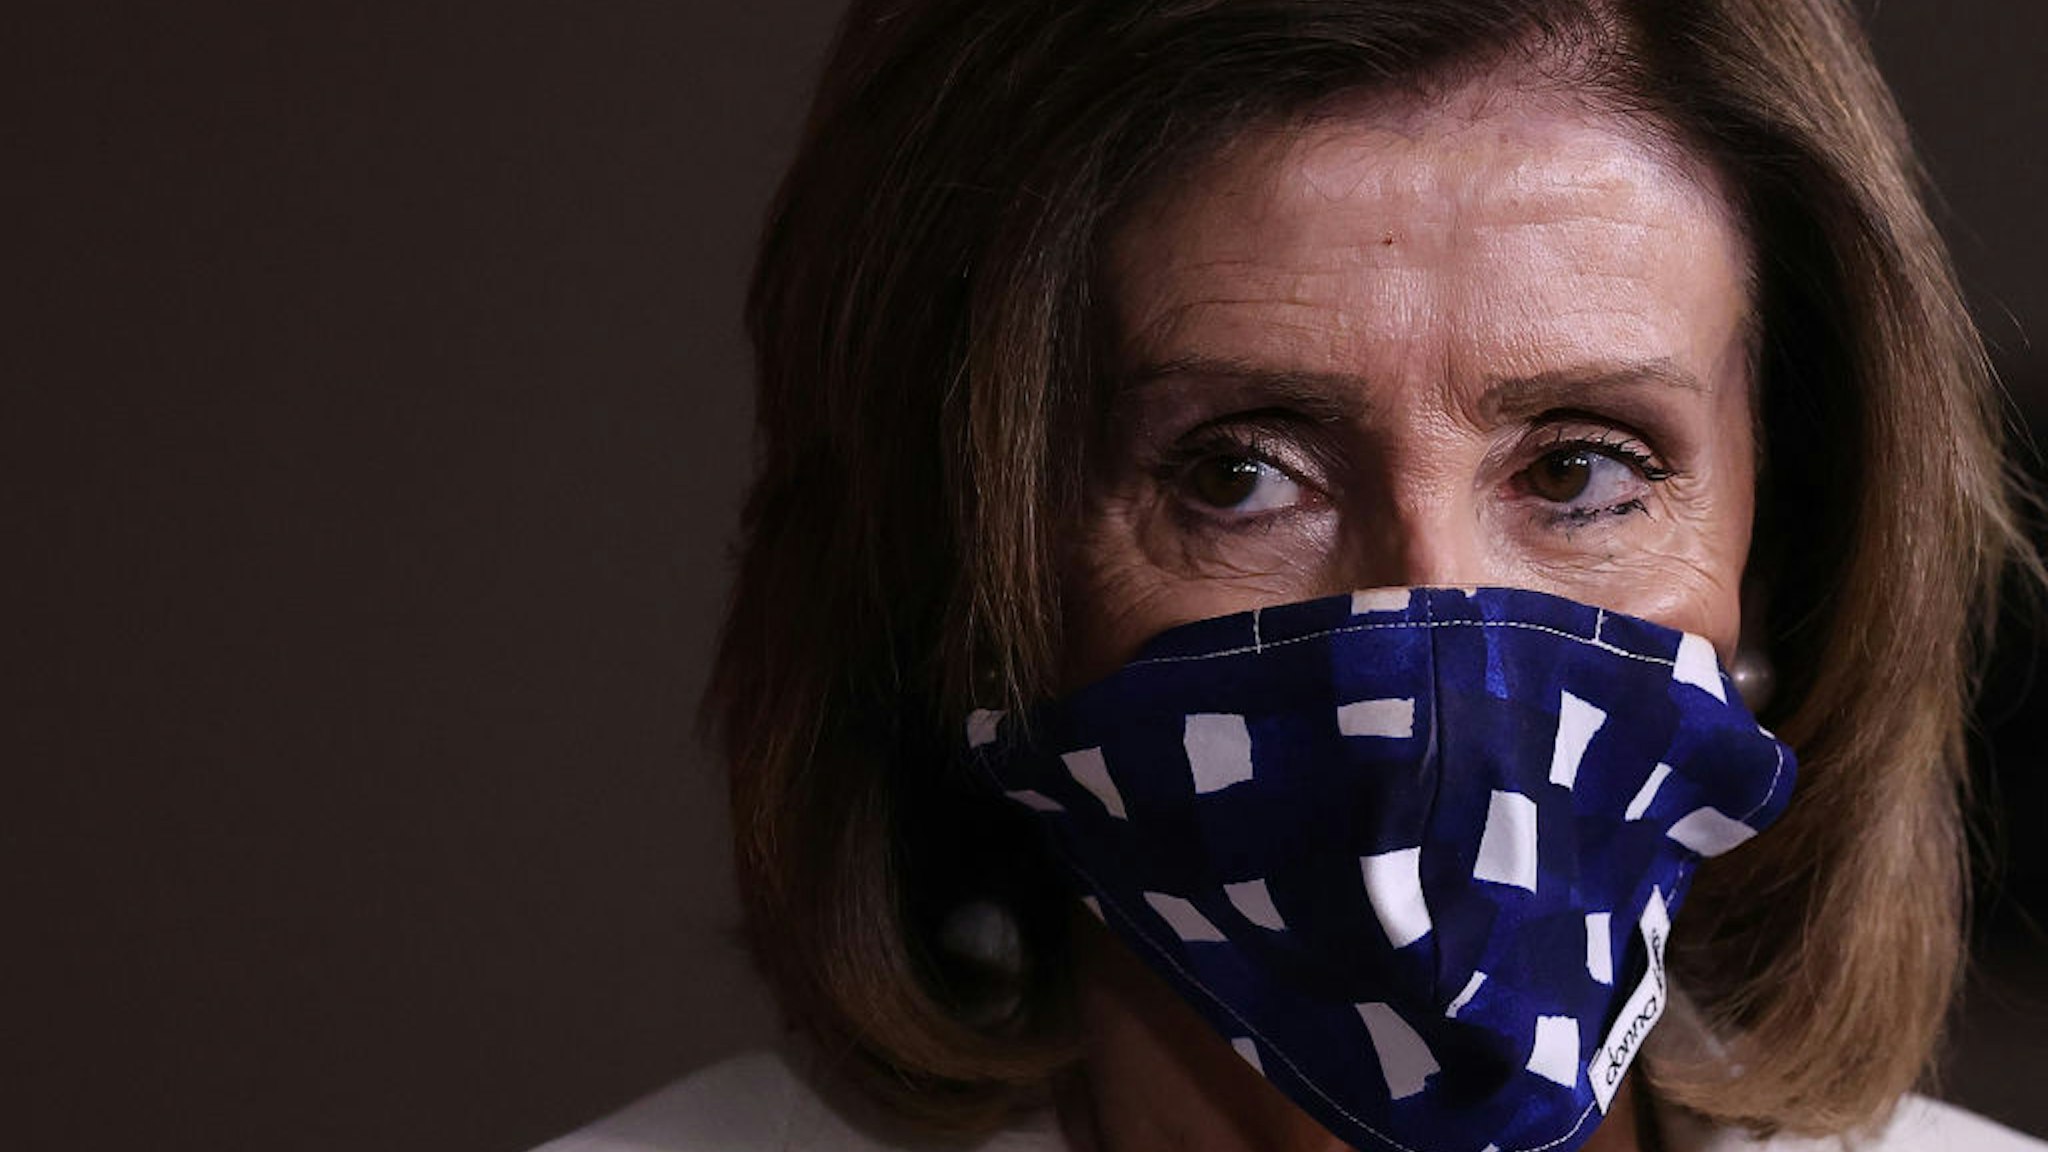 Speaker of the House Nancy Pelosi (D-CA) wears a cloth mask to cover her mouth and nose to prevent the spread of the novel coronavirus during her weekly news conference at the U.S. Capitol April 30, 2020 in Washington, DC.